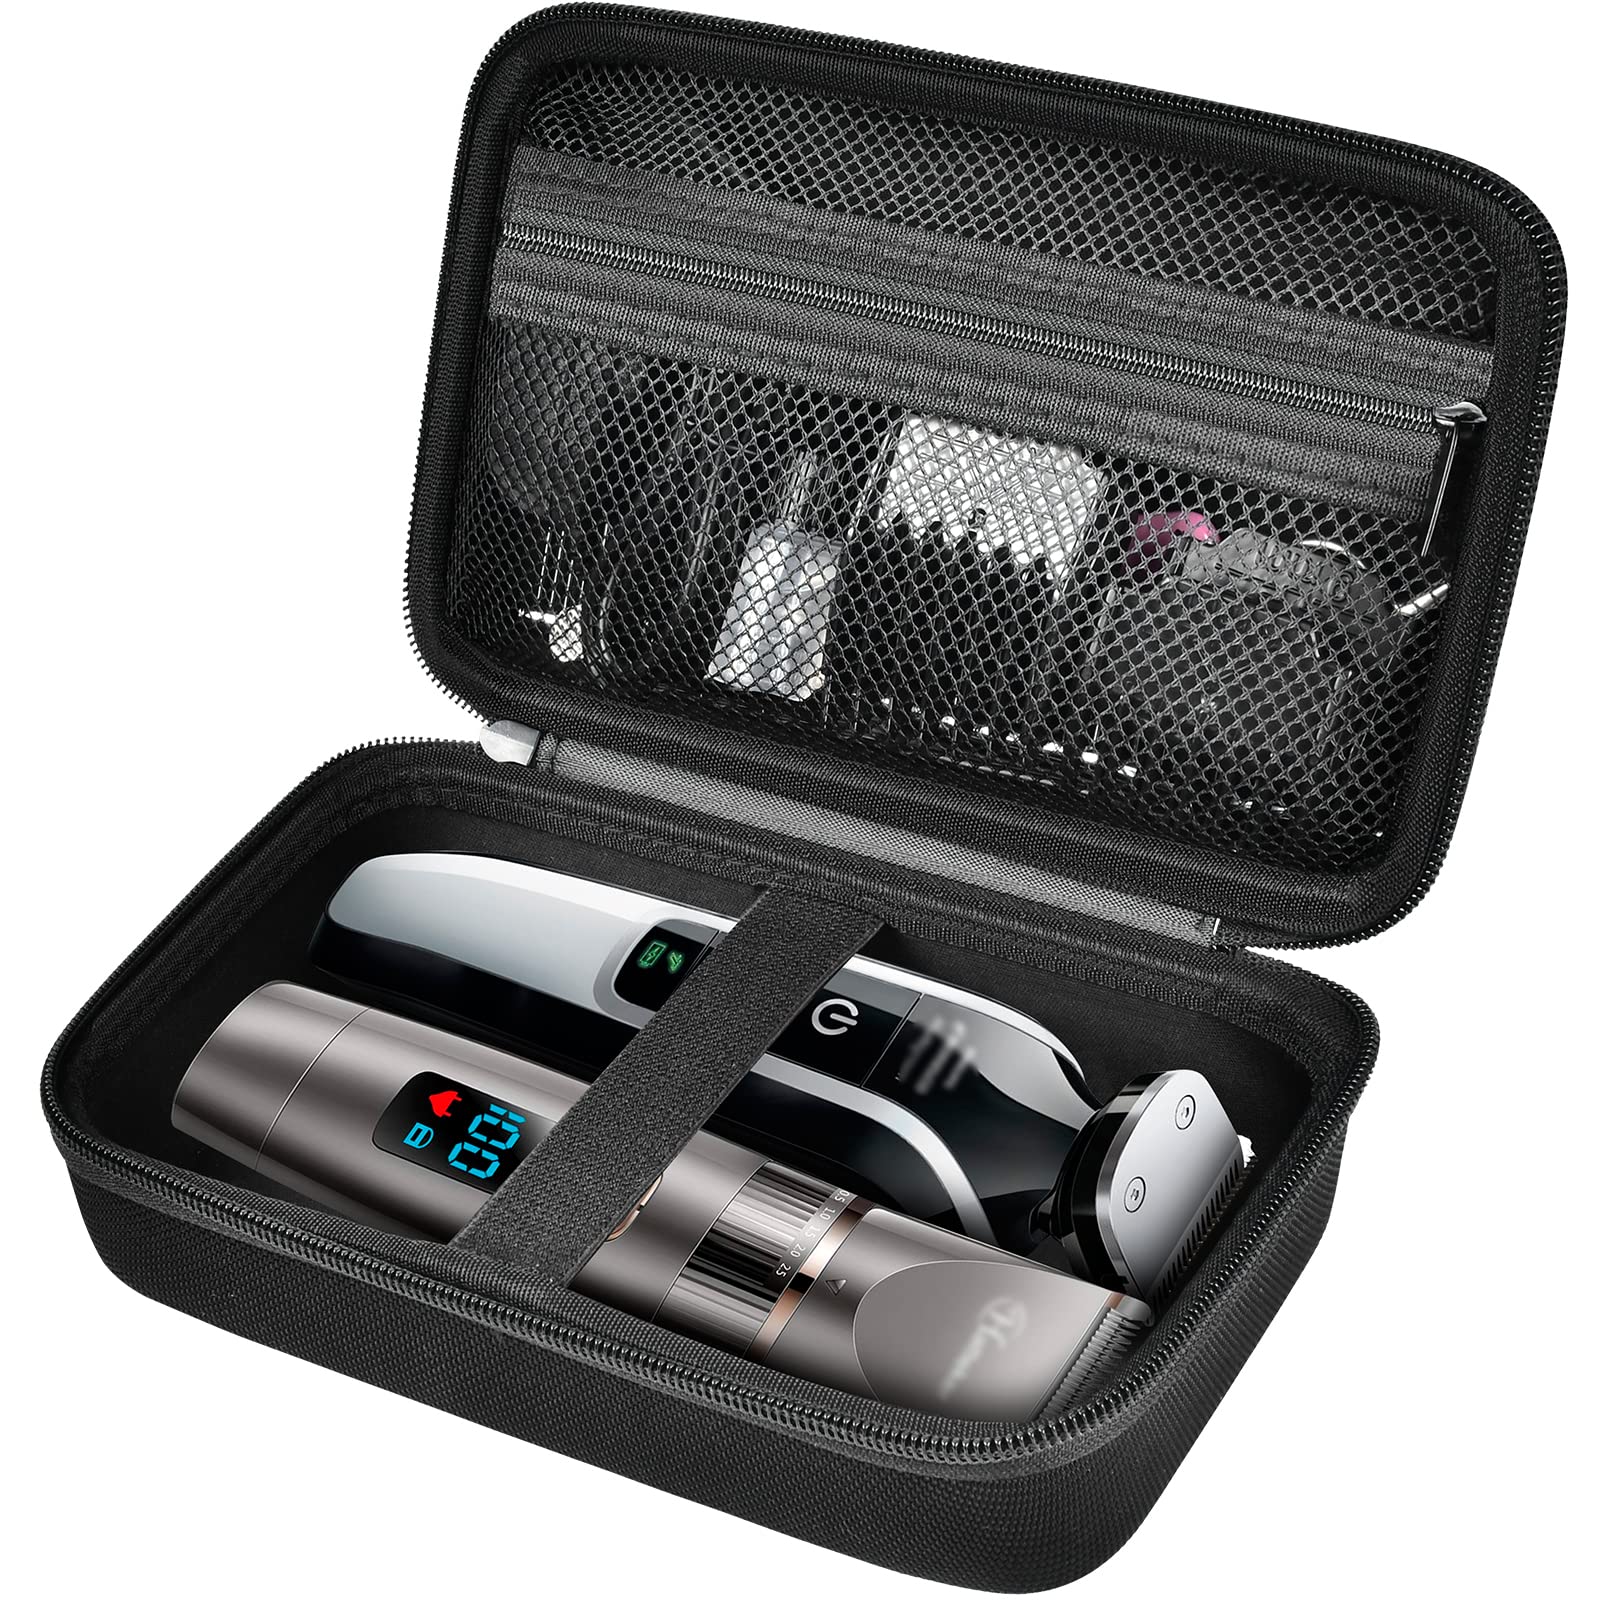 Case Compatible with Hair Clipper Barber, Trimmer Travel Storage Organizer for T Finisher Liner, Comb Cutting Guide, Clipper Blade Oil, Cleaning Brush and Other Grooming Kit - Black Case+Black Zipper